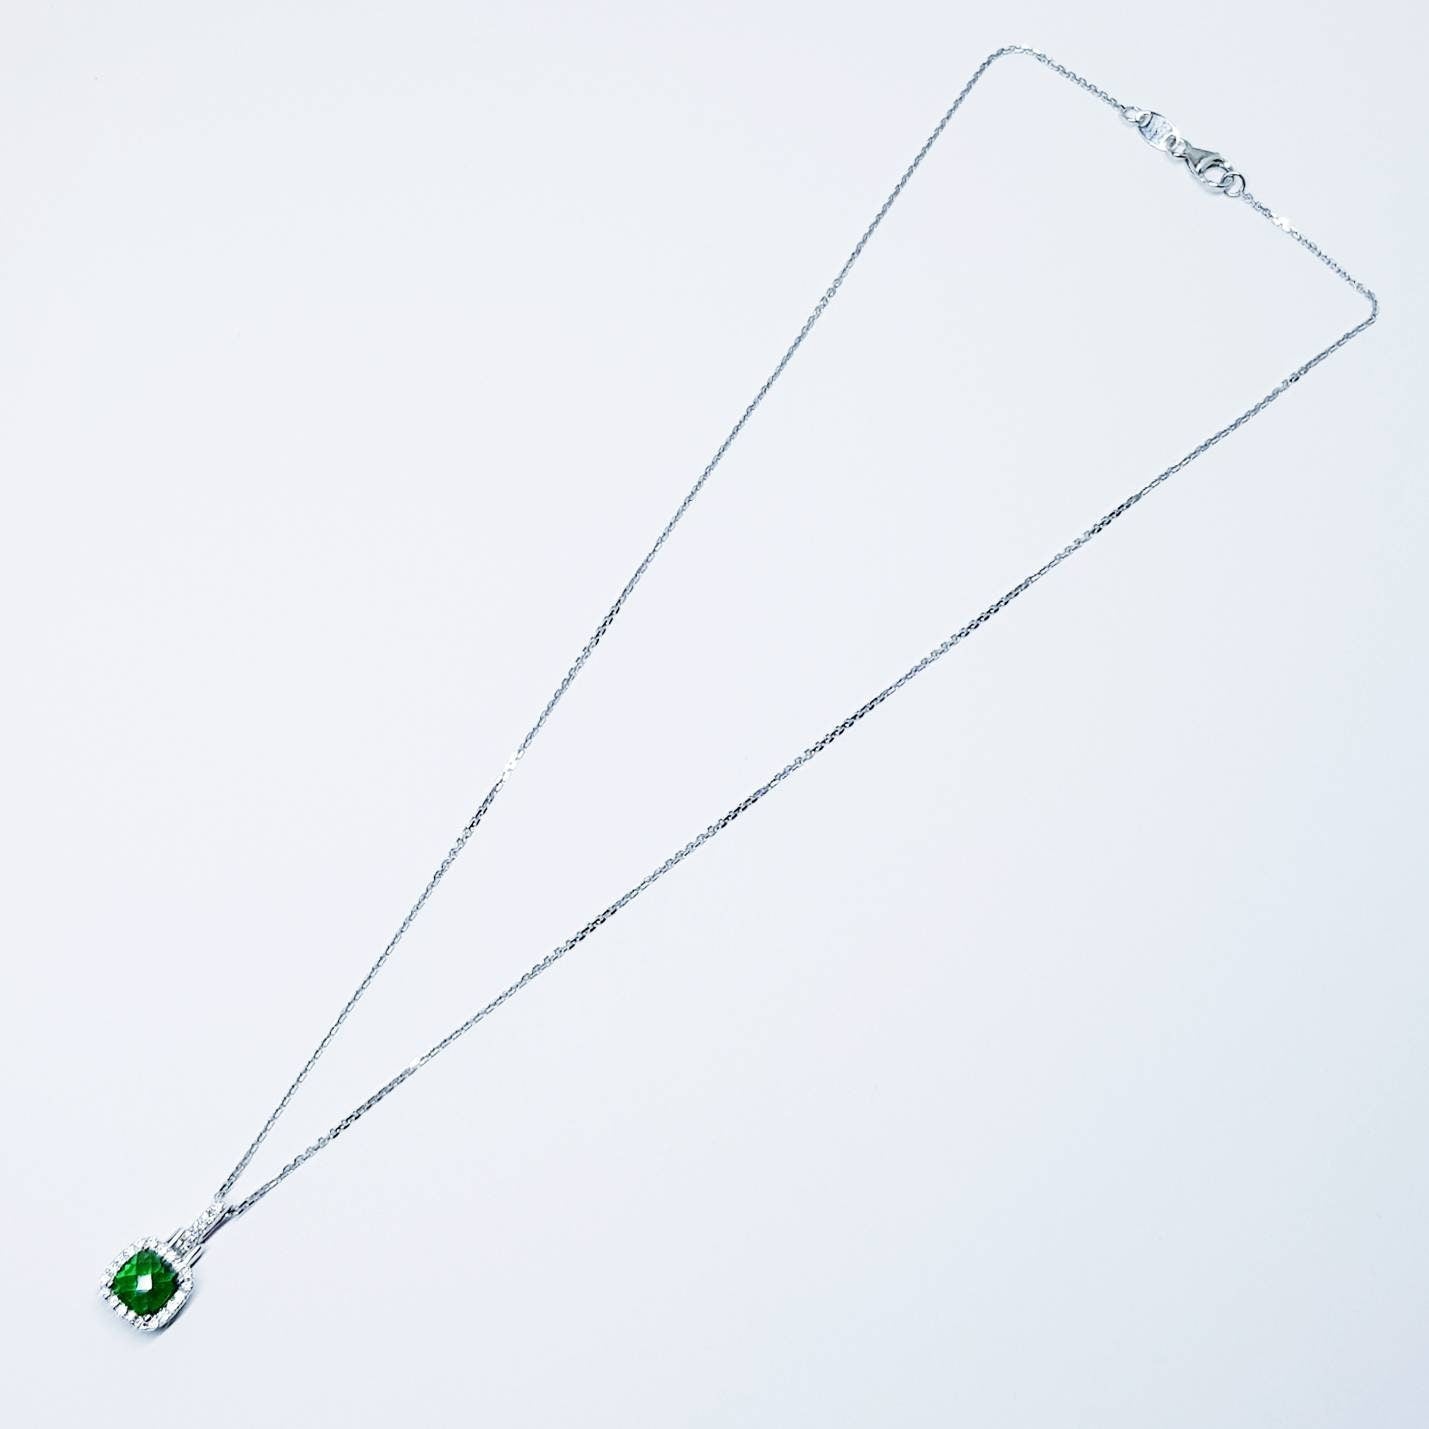 Sterling silver emerald green square necklace with cubic zirconia halo, vintage emerald pendant